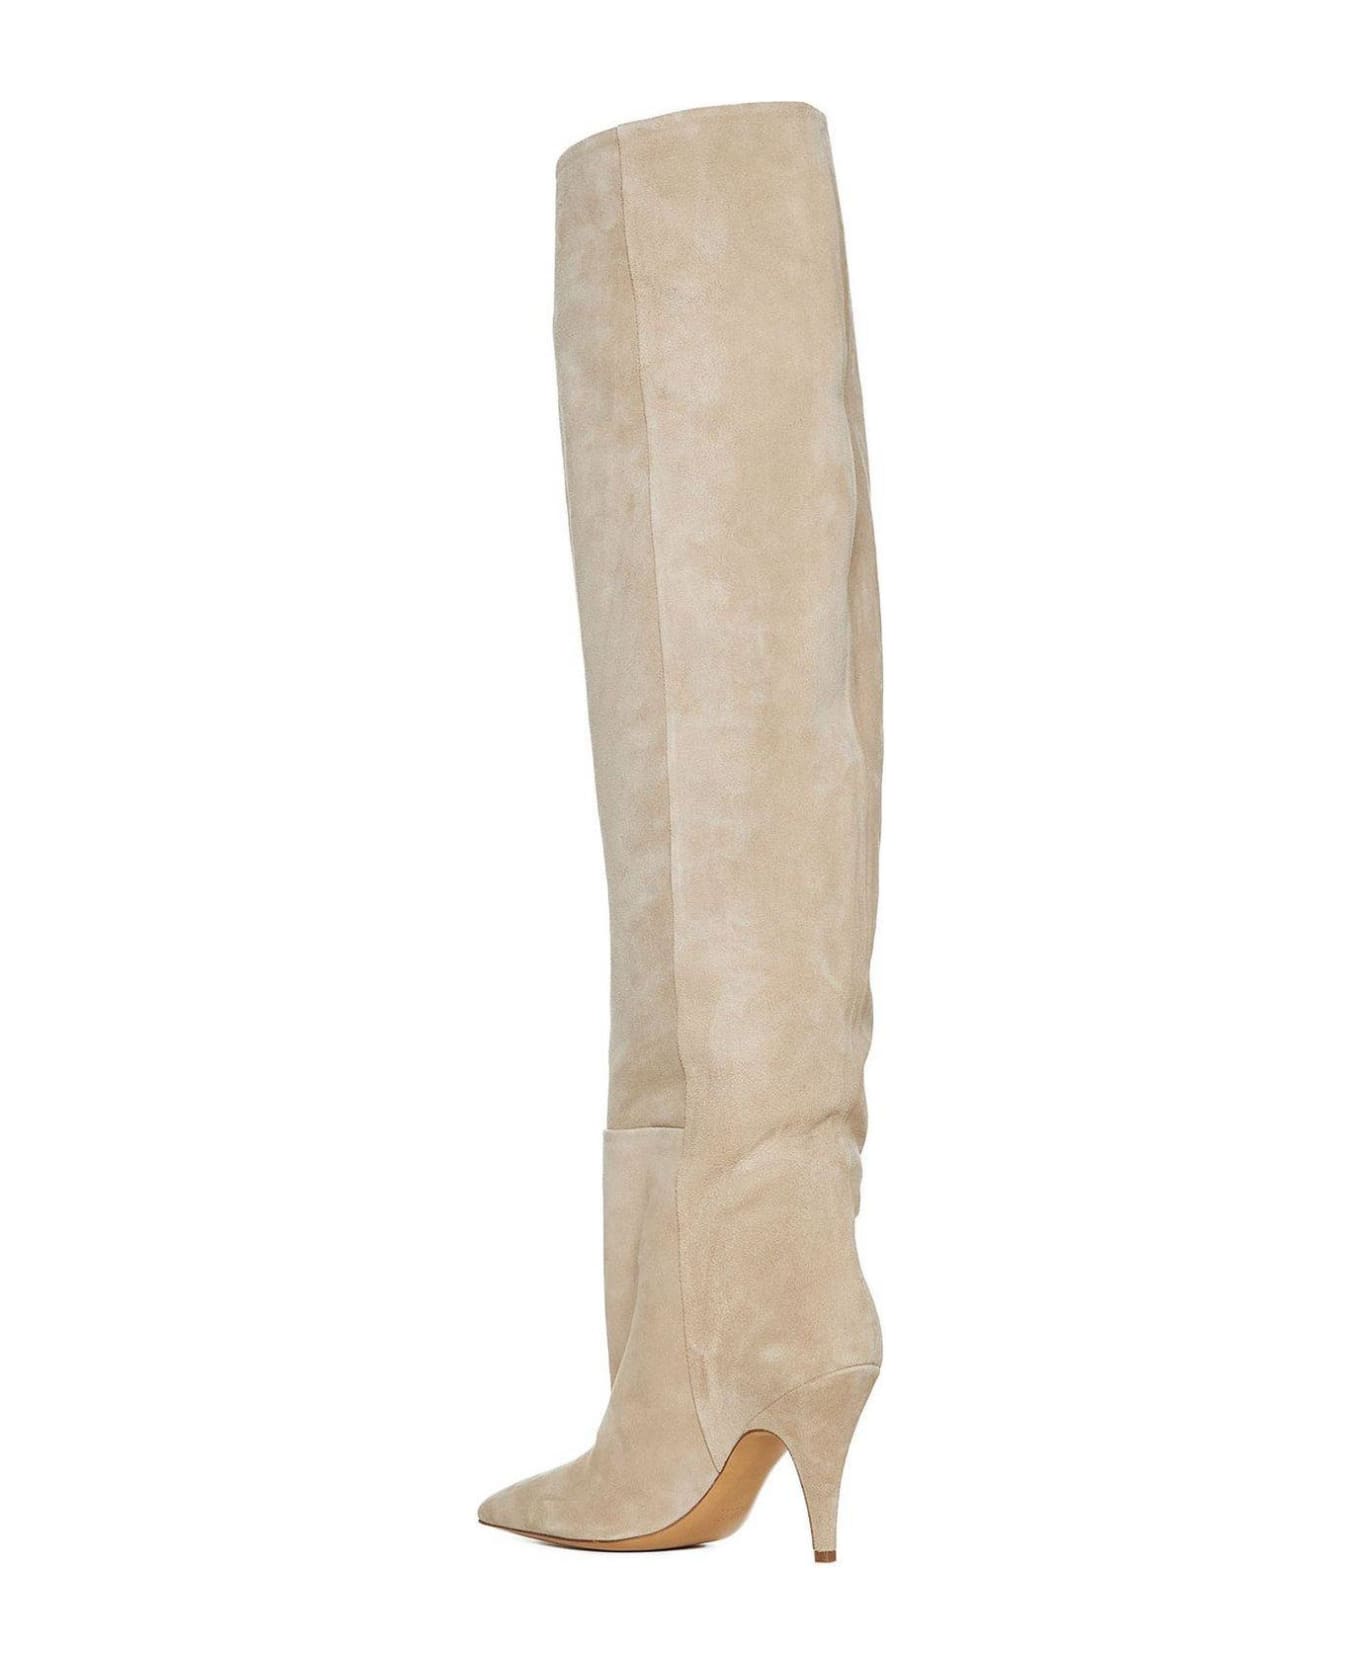 Khaite The River Pointed-toe Knee-high Boots - NUDE